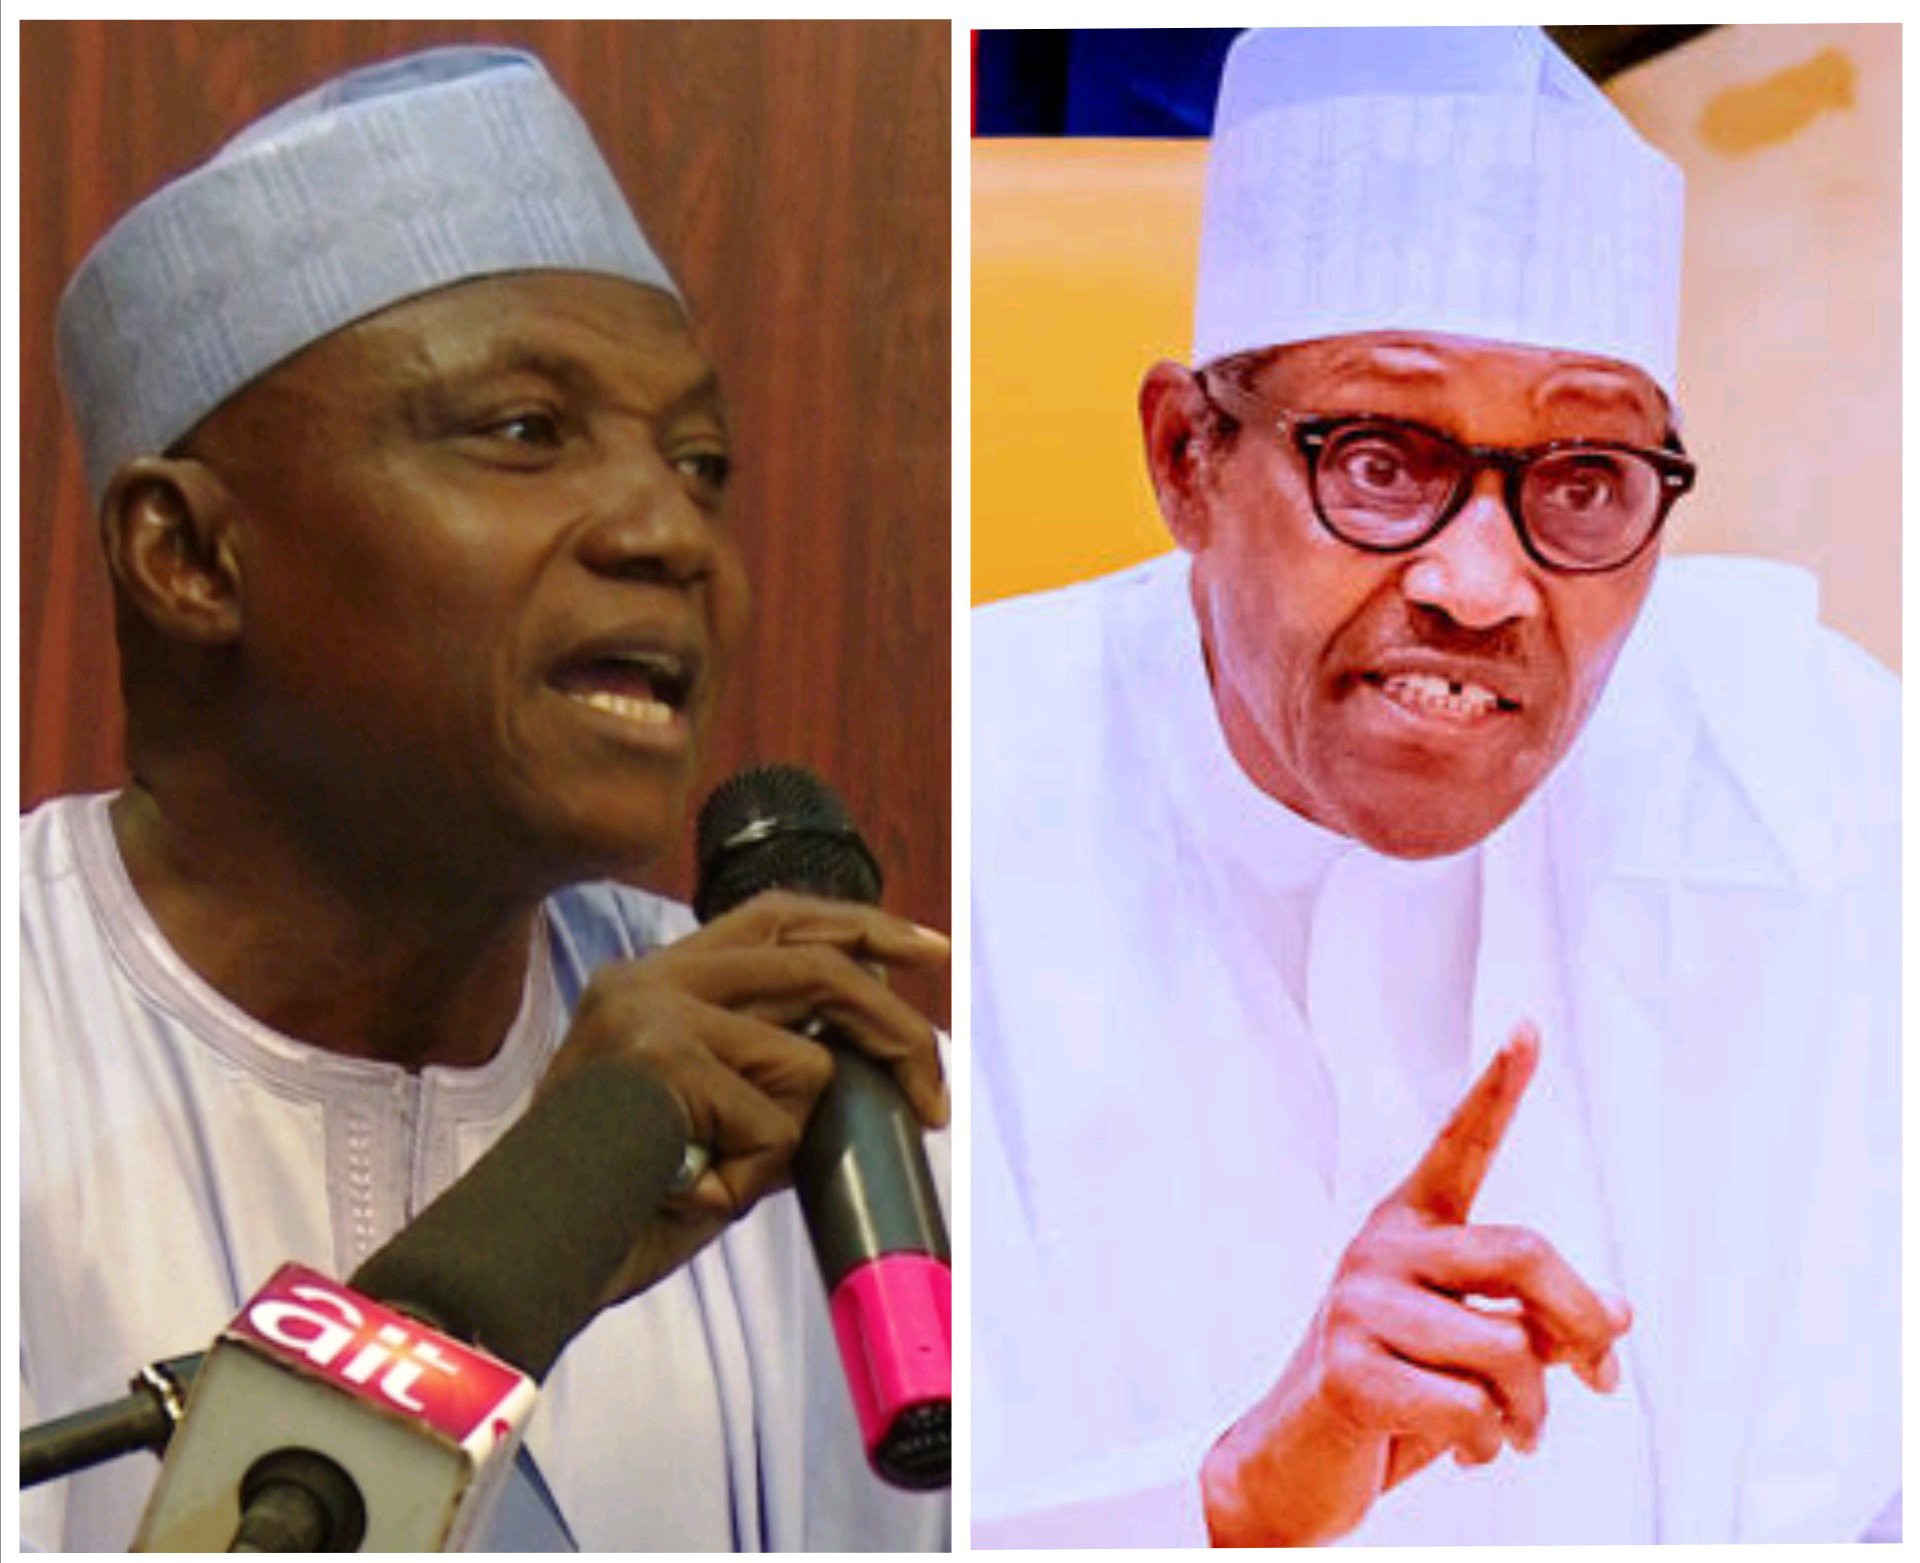 During The Time Of Buhari, Travellers To The East Used To Spend About 3Days On The Road- According to Garba Shehu